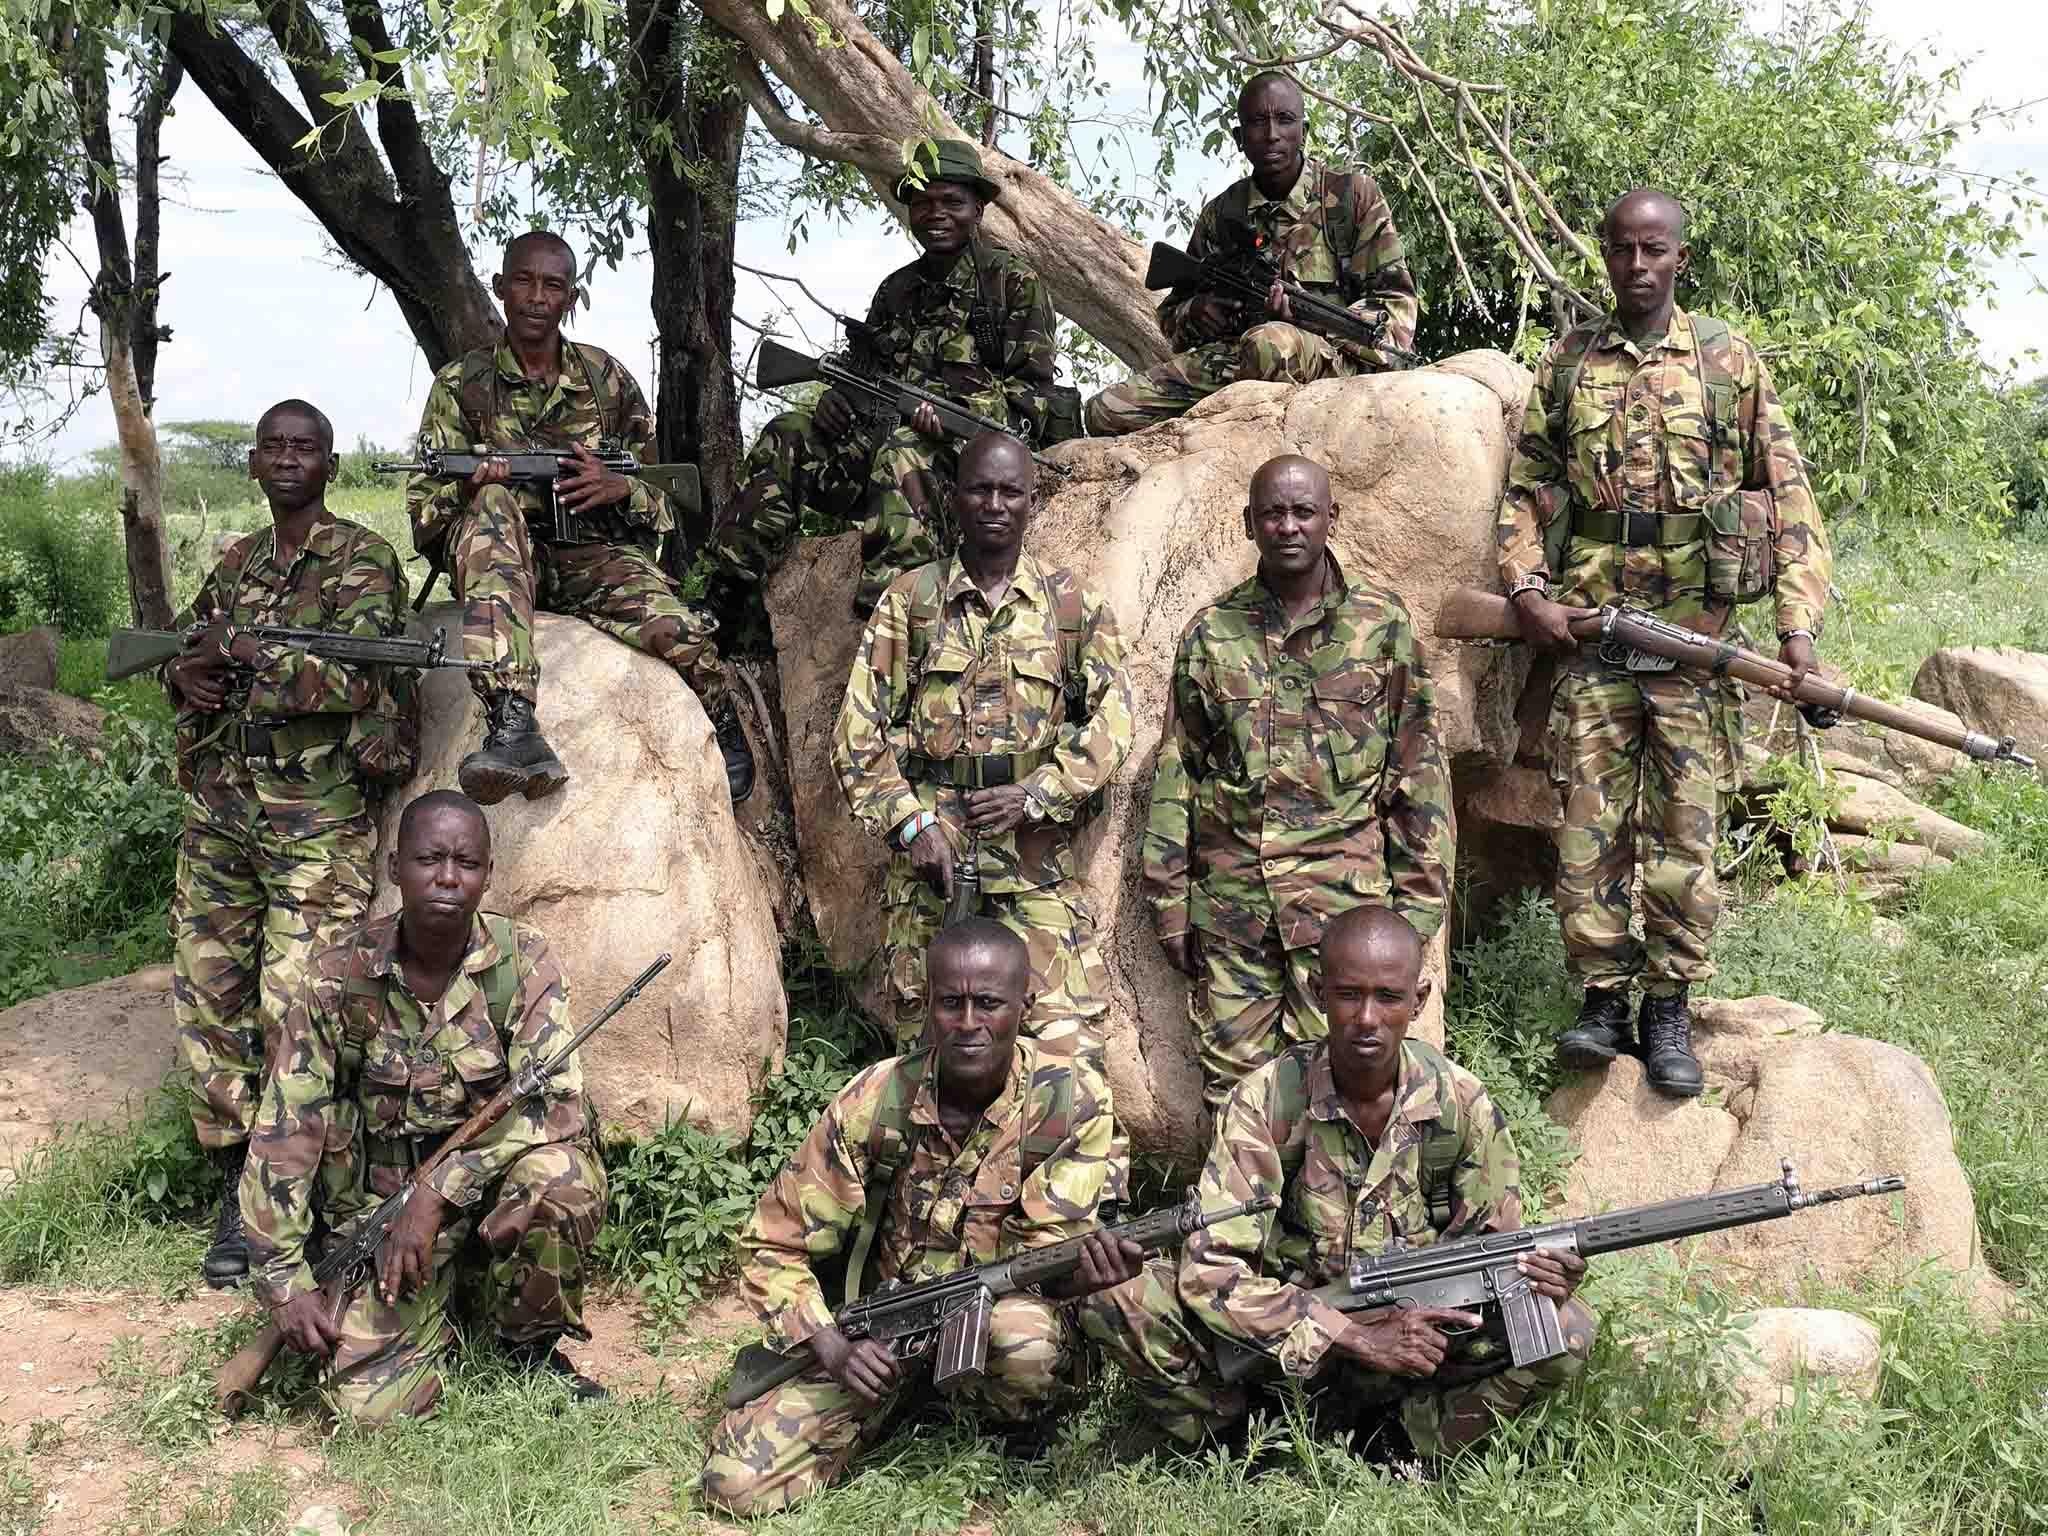 To stop this slaughter, the Giants Club – through its implementation charity Space for Giants – equips, trains and finances teams of rangers. This unit in central Kenya can spend weeks on end on patrol, travelling in 4x4 vehicles and sleeping in the bush.